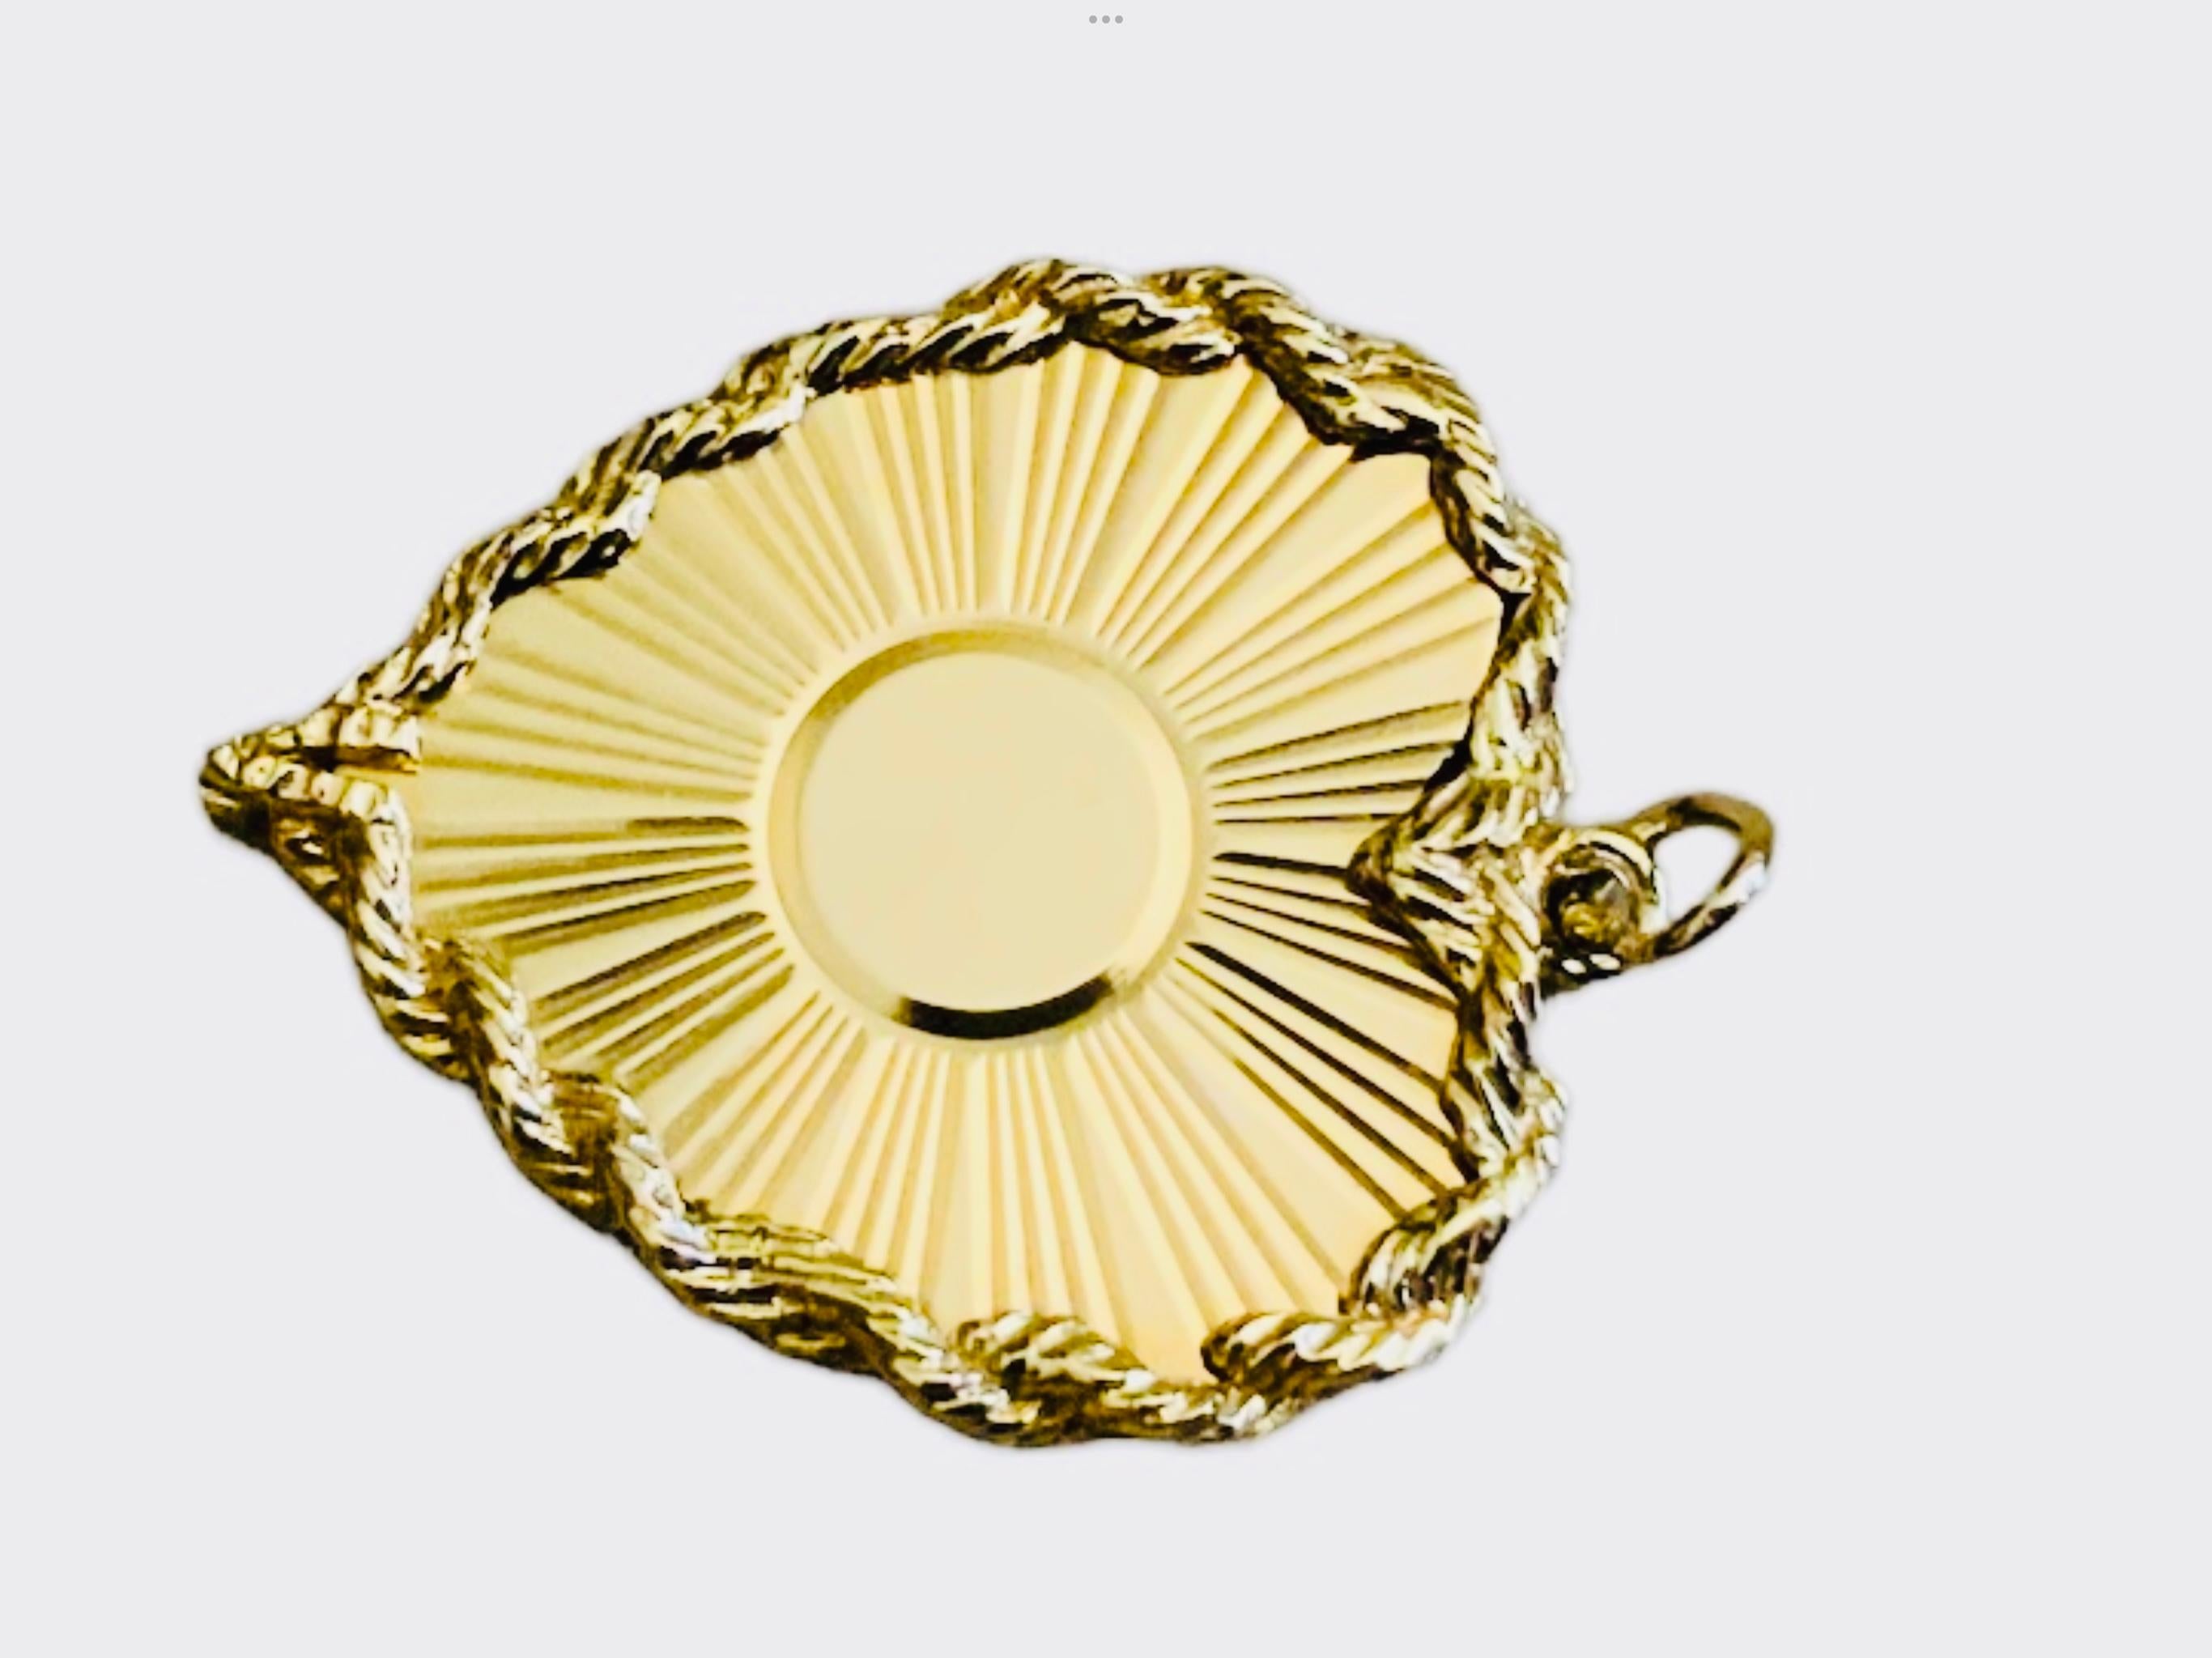 This is an 14K yellow gold heart pendant. It depicts a heart with a circular center and some sun rays (reeded metal) coming out from it. The whole border of the heart is adorned with a rope chain. An oval gold ring is attached to the pendant to be